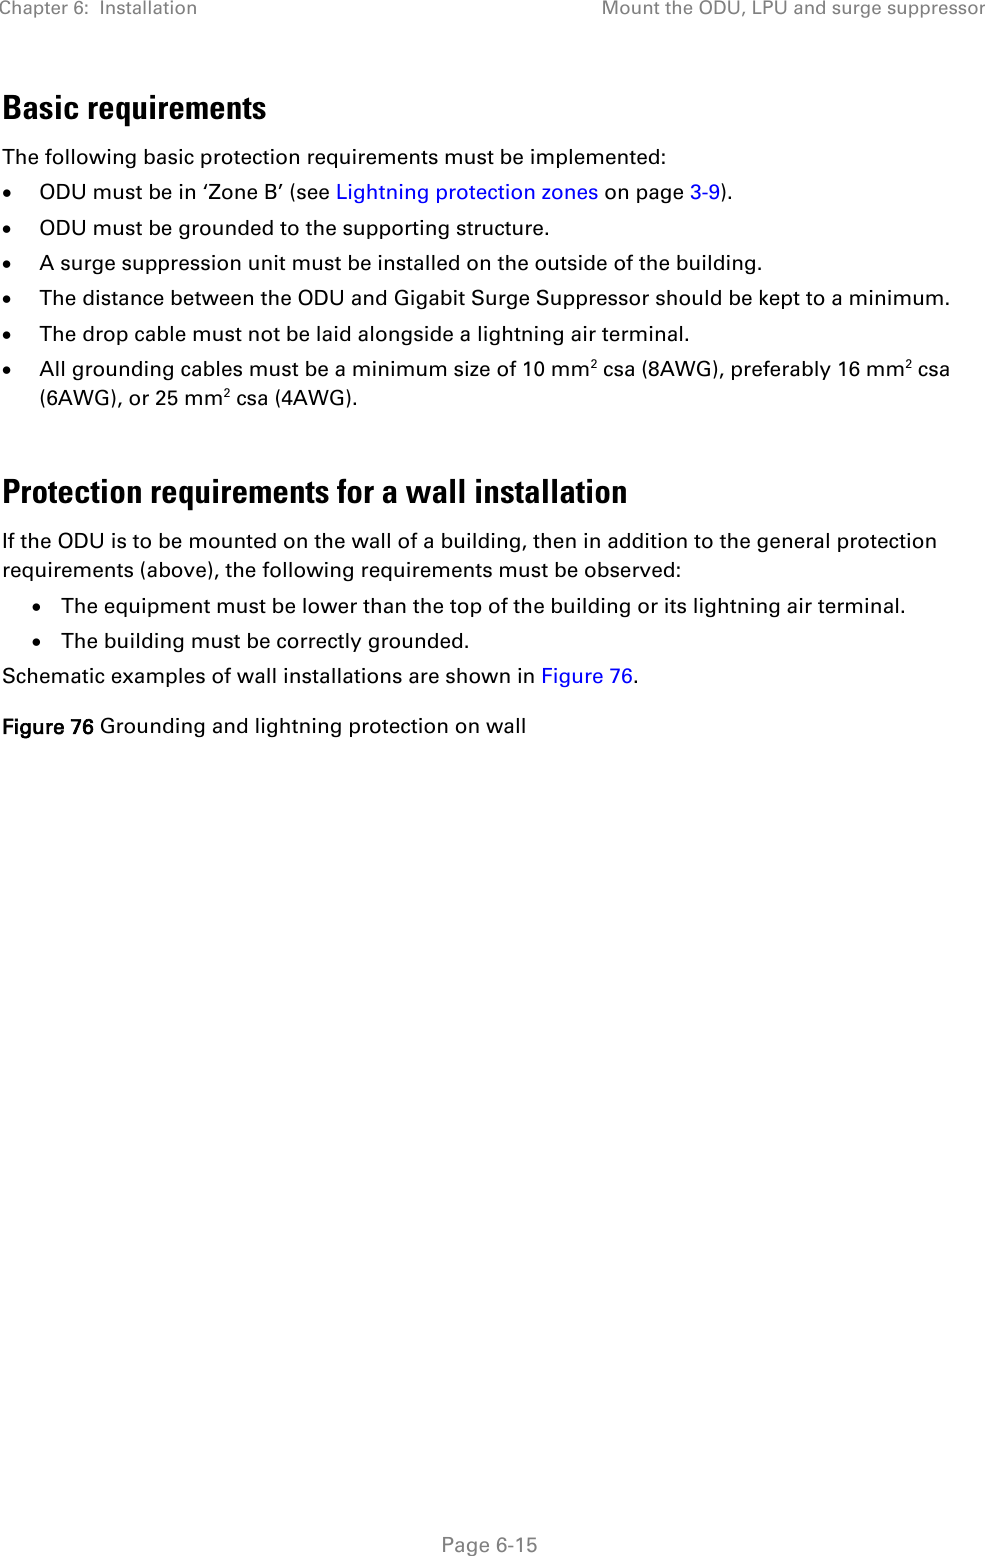 Chapter 6:  Installation Mount the ODU, LPU and surge suppressor   Page 6-15 Basic requirements The following basic protection requirements must be implemented: • ODU must be in ‘Zone B’ (see Lightning protection zones on page 3-9). • ODU must be grounded to the supporting structure. • A surge suppression unit must be installed on the outside of the building. • The distance between the ODU and Gigabit Surge Suppressor should be kept to a minimum. • The drop cable must not be laid alongside a lightning air terminal. • All grounding cables must be a minimum size of 10 mm2 csa (8AWG), preferably 16 mm2 csa (6AWG), or 25 mm2 csa (4AWG).  Protection requirements for a wall installation If the ODU is to be mounted on the wall of a building, then in addition to the general protection requirements (above), the following requirements must be observed: • The equipment must be lower than the top of the building or its lightning air terminal. • The building must be correctly grounded. Schematic examples of wall installations are shown in Figure 76. Figure 76 Grounding and lightning protection on wall   